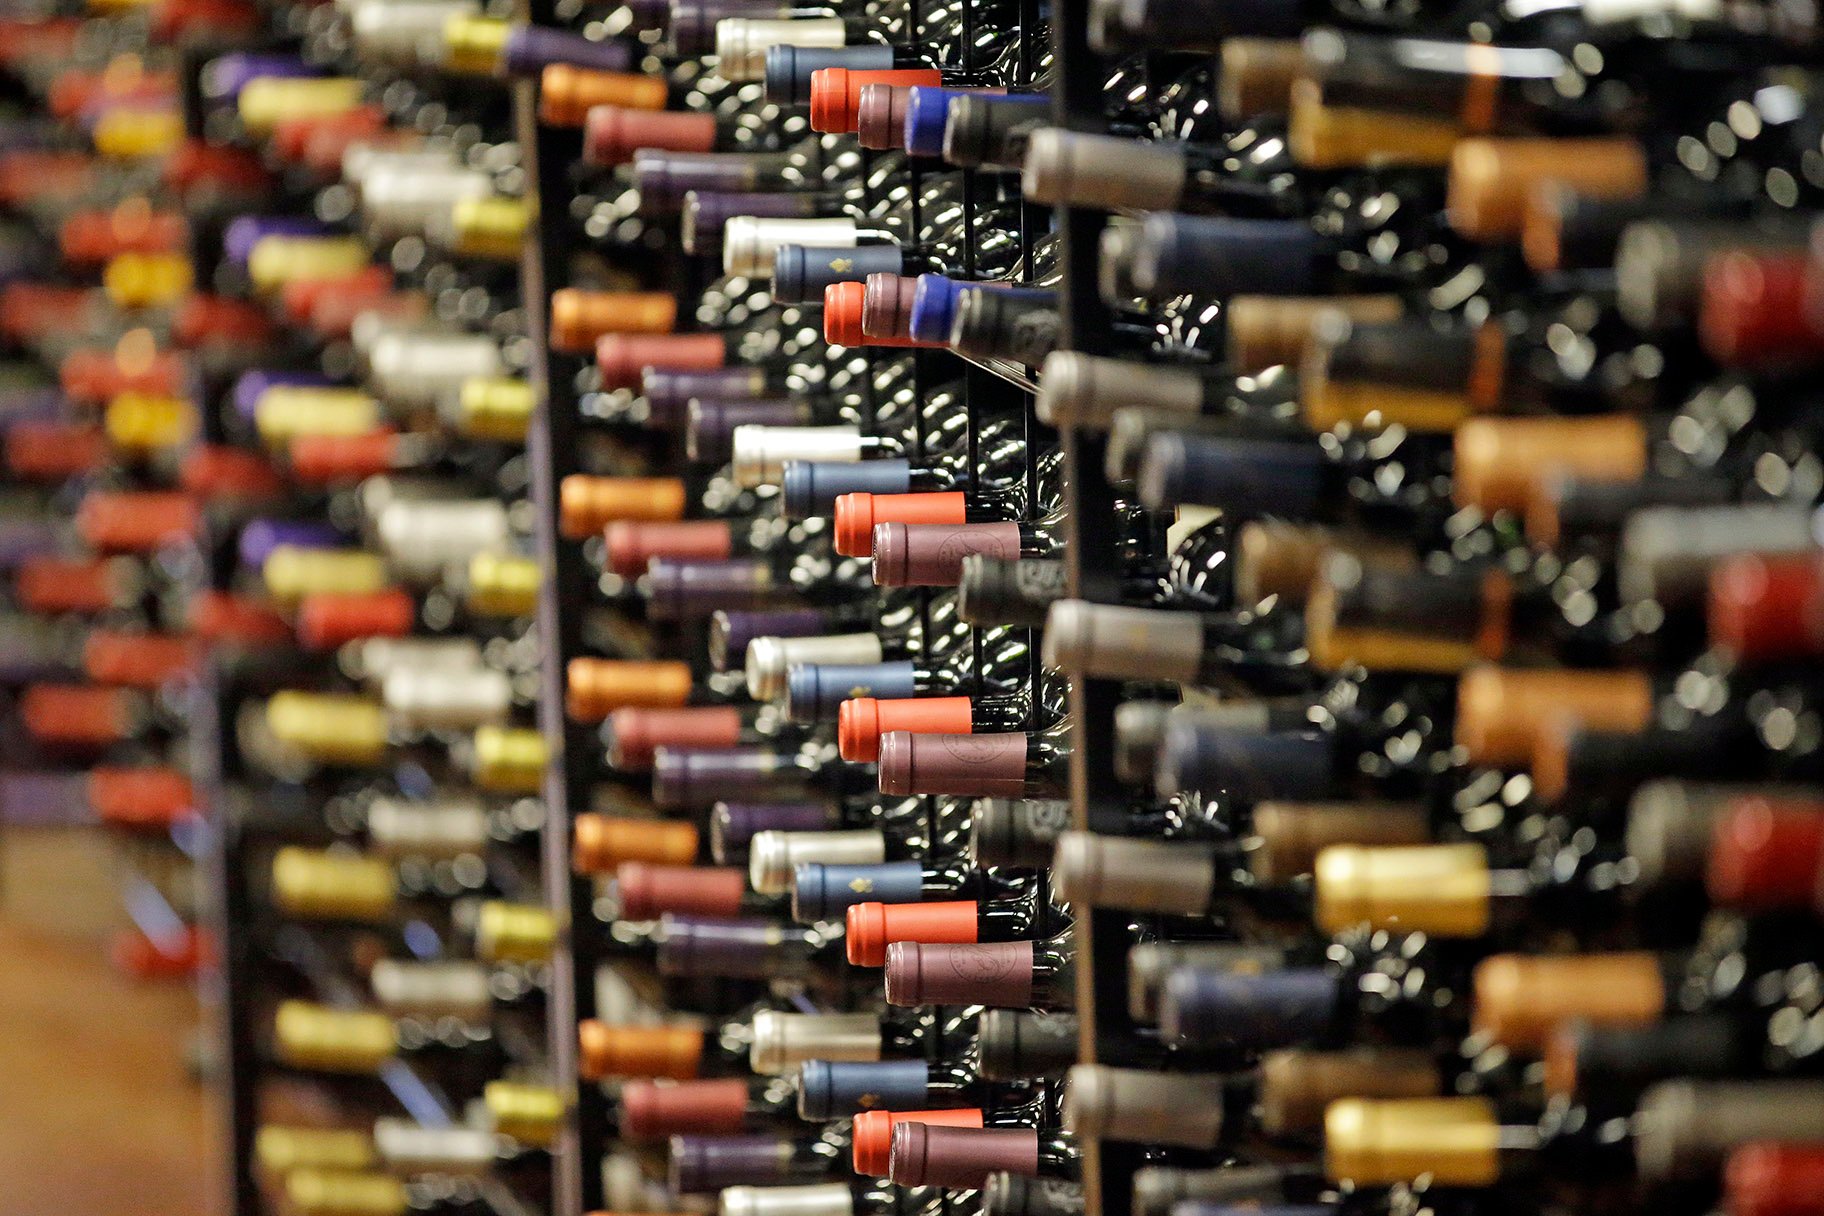 In this June 16, 2016, file photo, bottles of wine are displayed during a tour of a state liquor store, in Salt Lake City. According to federal health statistics, Americans are drinking more now than when Prohibition was enacted a century earlier. (AP Photo / Rick Bowmer, File)